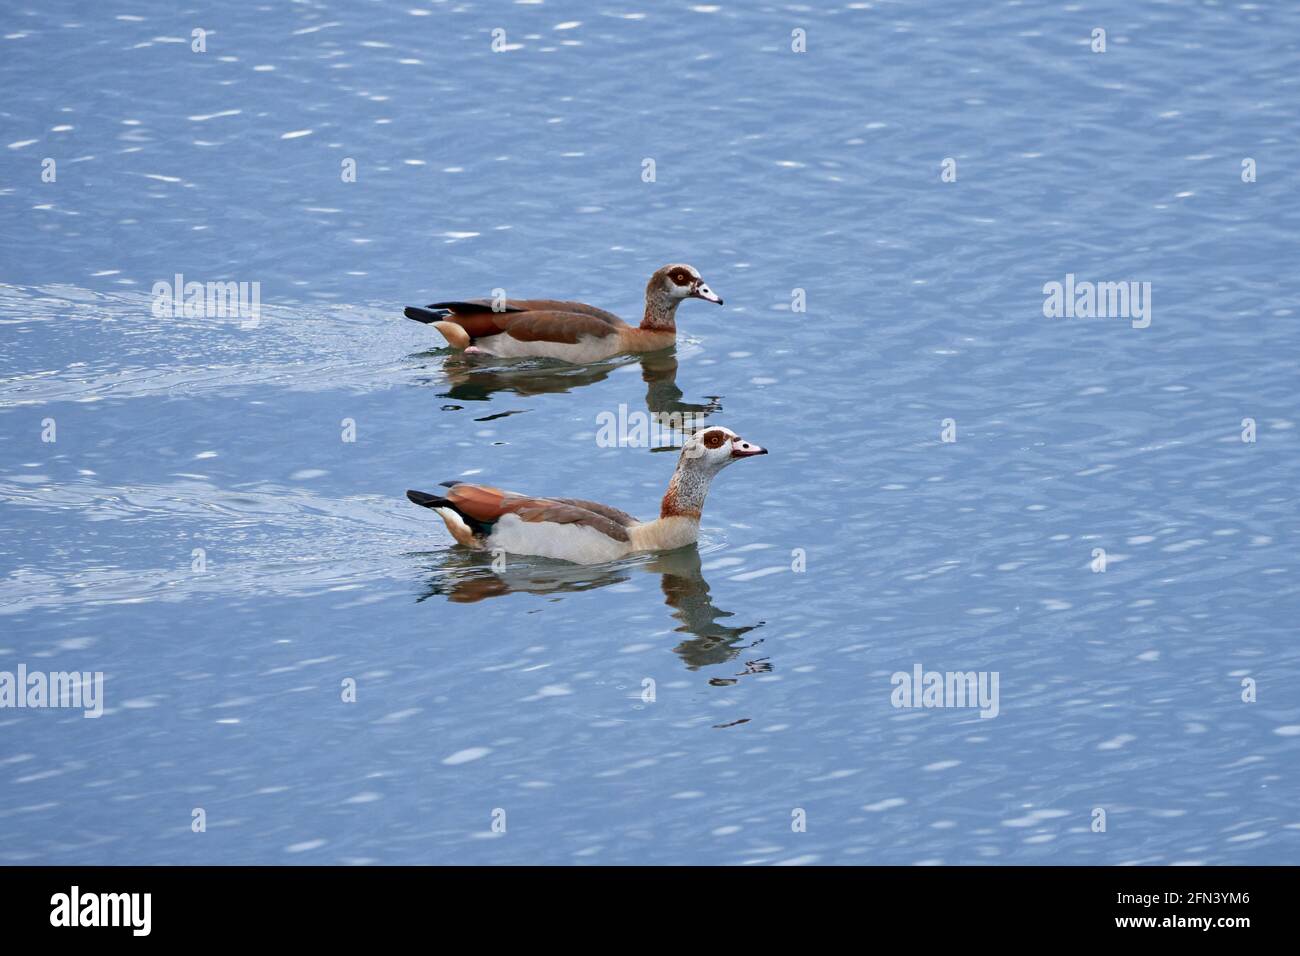 Two Egyptian geese (Alopochen aegyptiaca) swim in the lake with blue water. Stock Photo